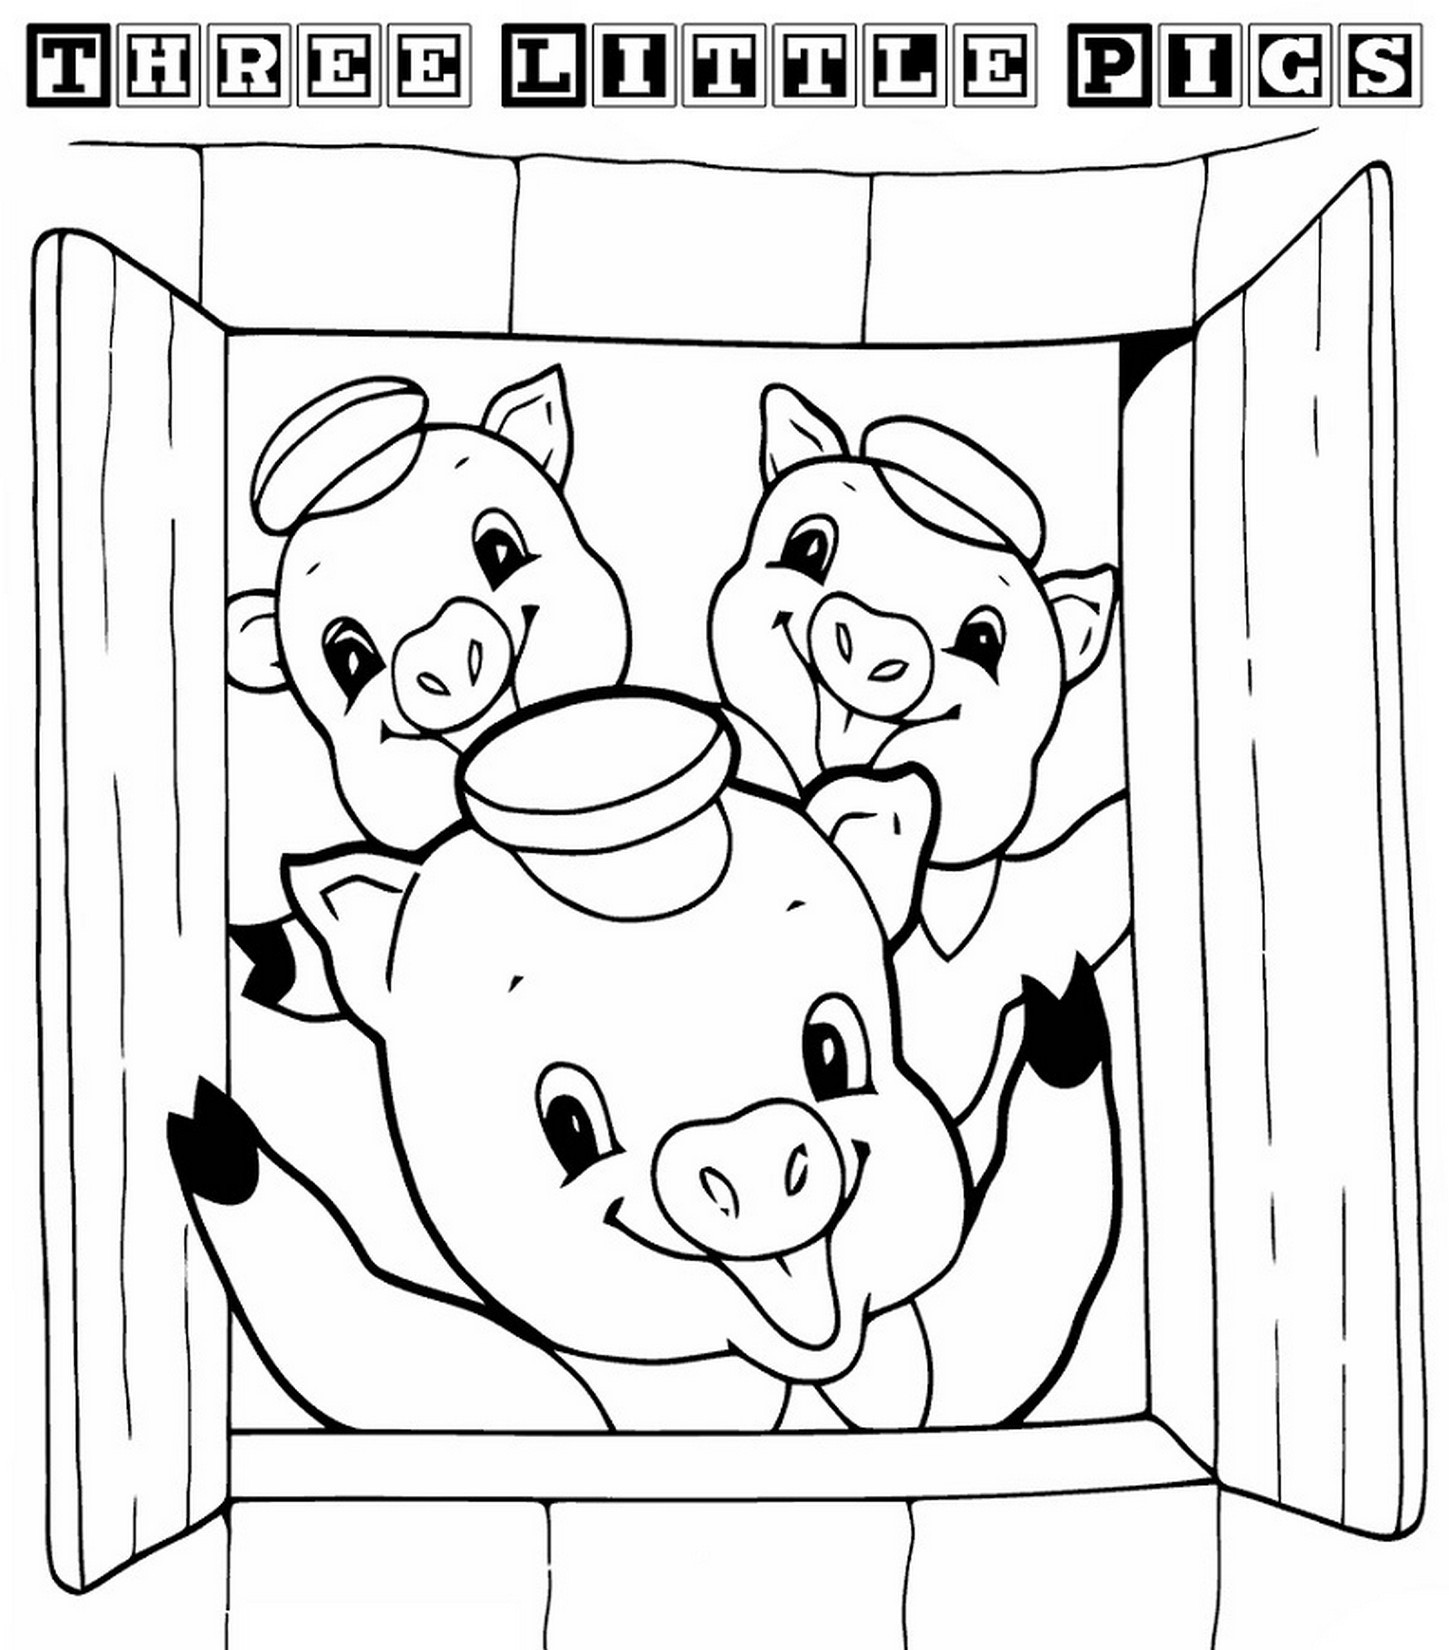 Preschool Coloring Sheets For The 3 Little Pigs Wolf Mask
 Three Little Pigs Coloring Pages for Preschool